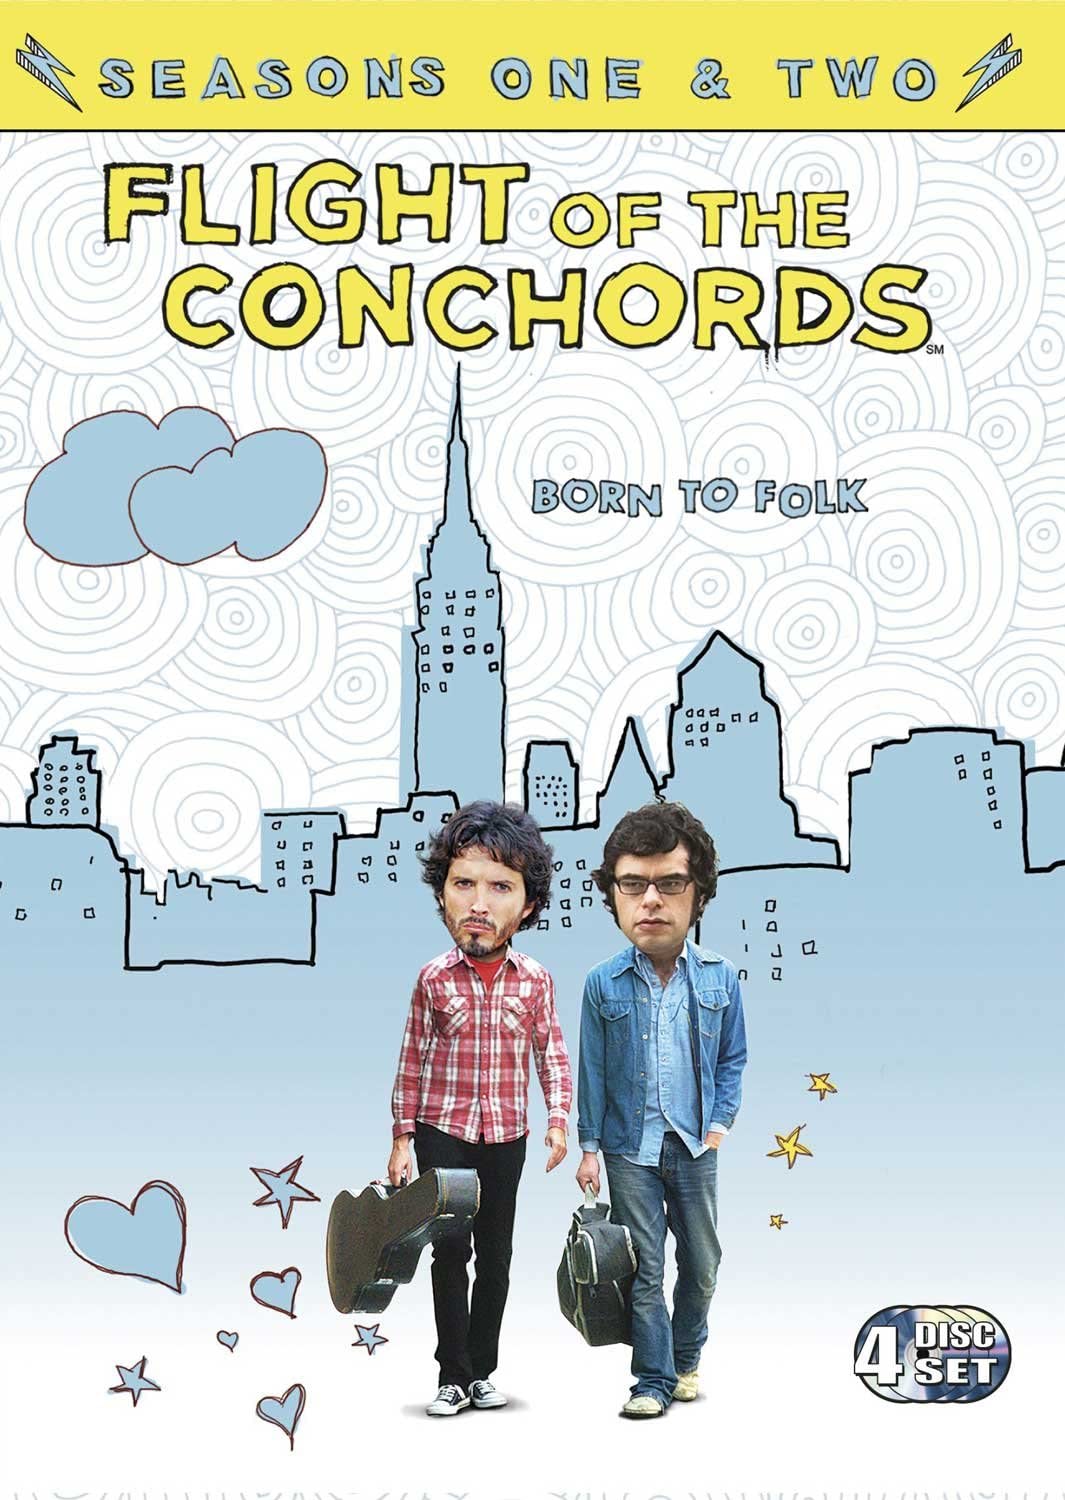 Flight Of The Conchords - Complete HBO First and Second Season [DVD]